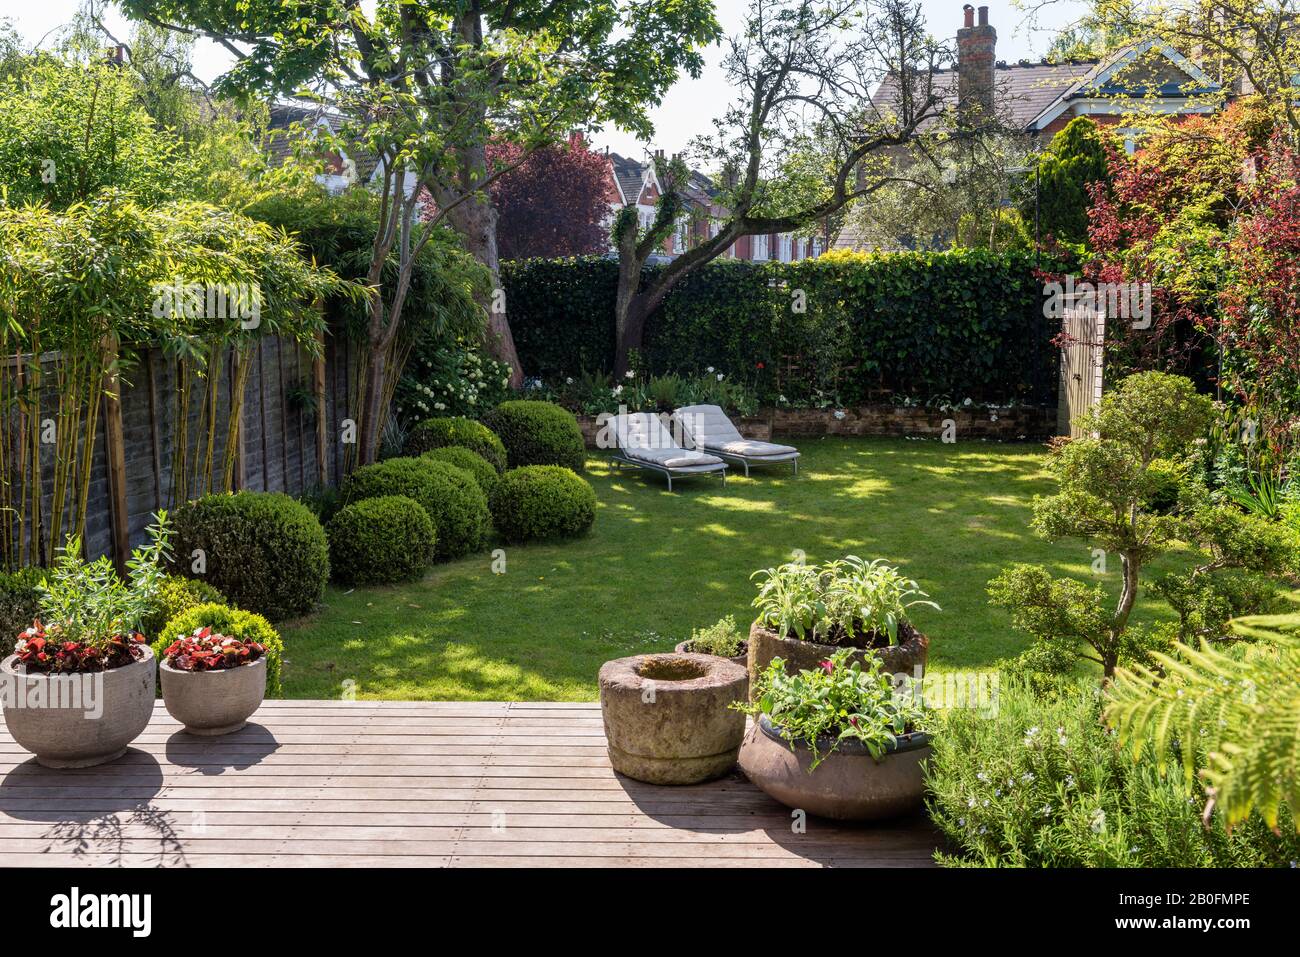 Garden planting to create interest and a sense of privacy combined with an open aspect. Stock Photo